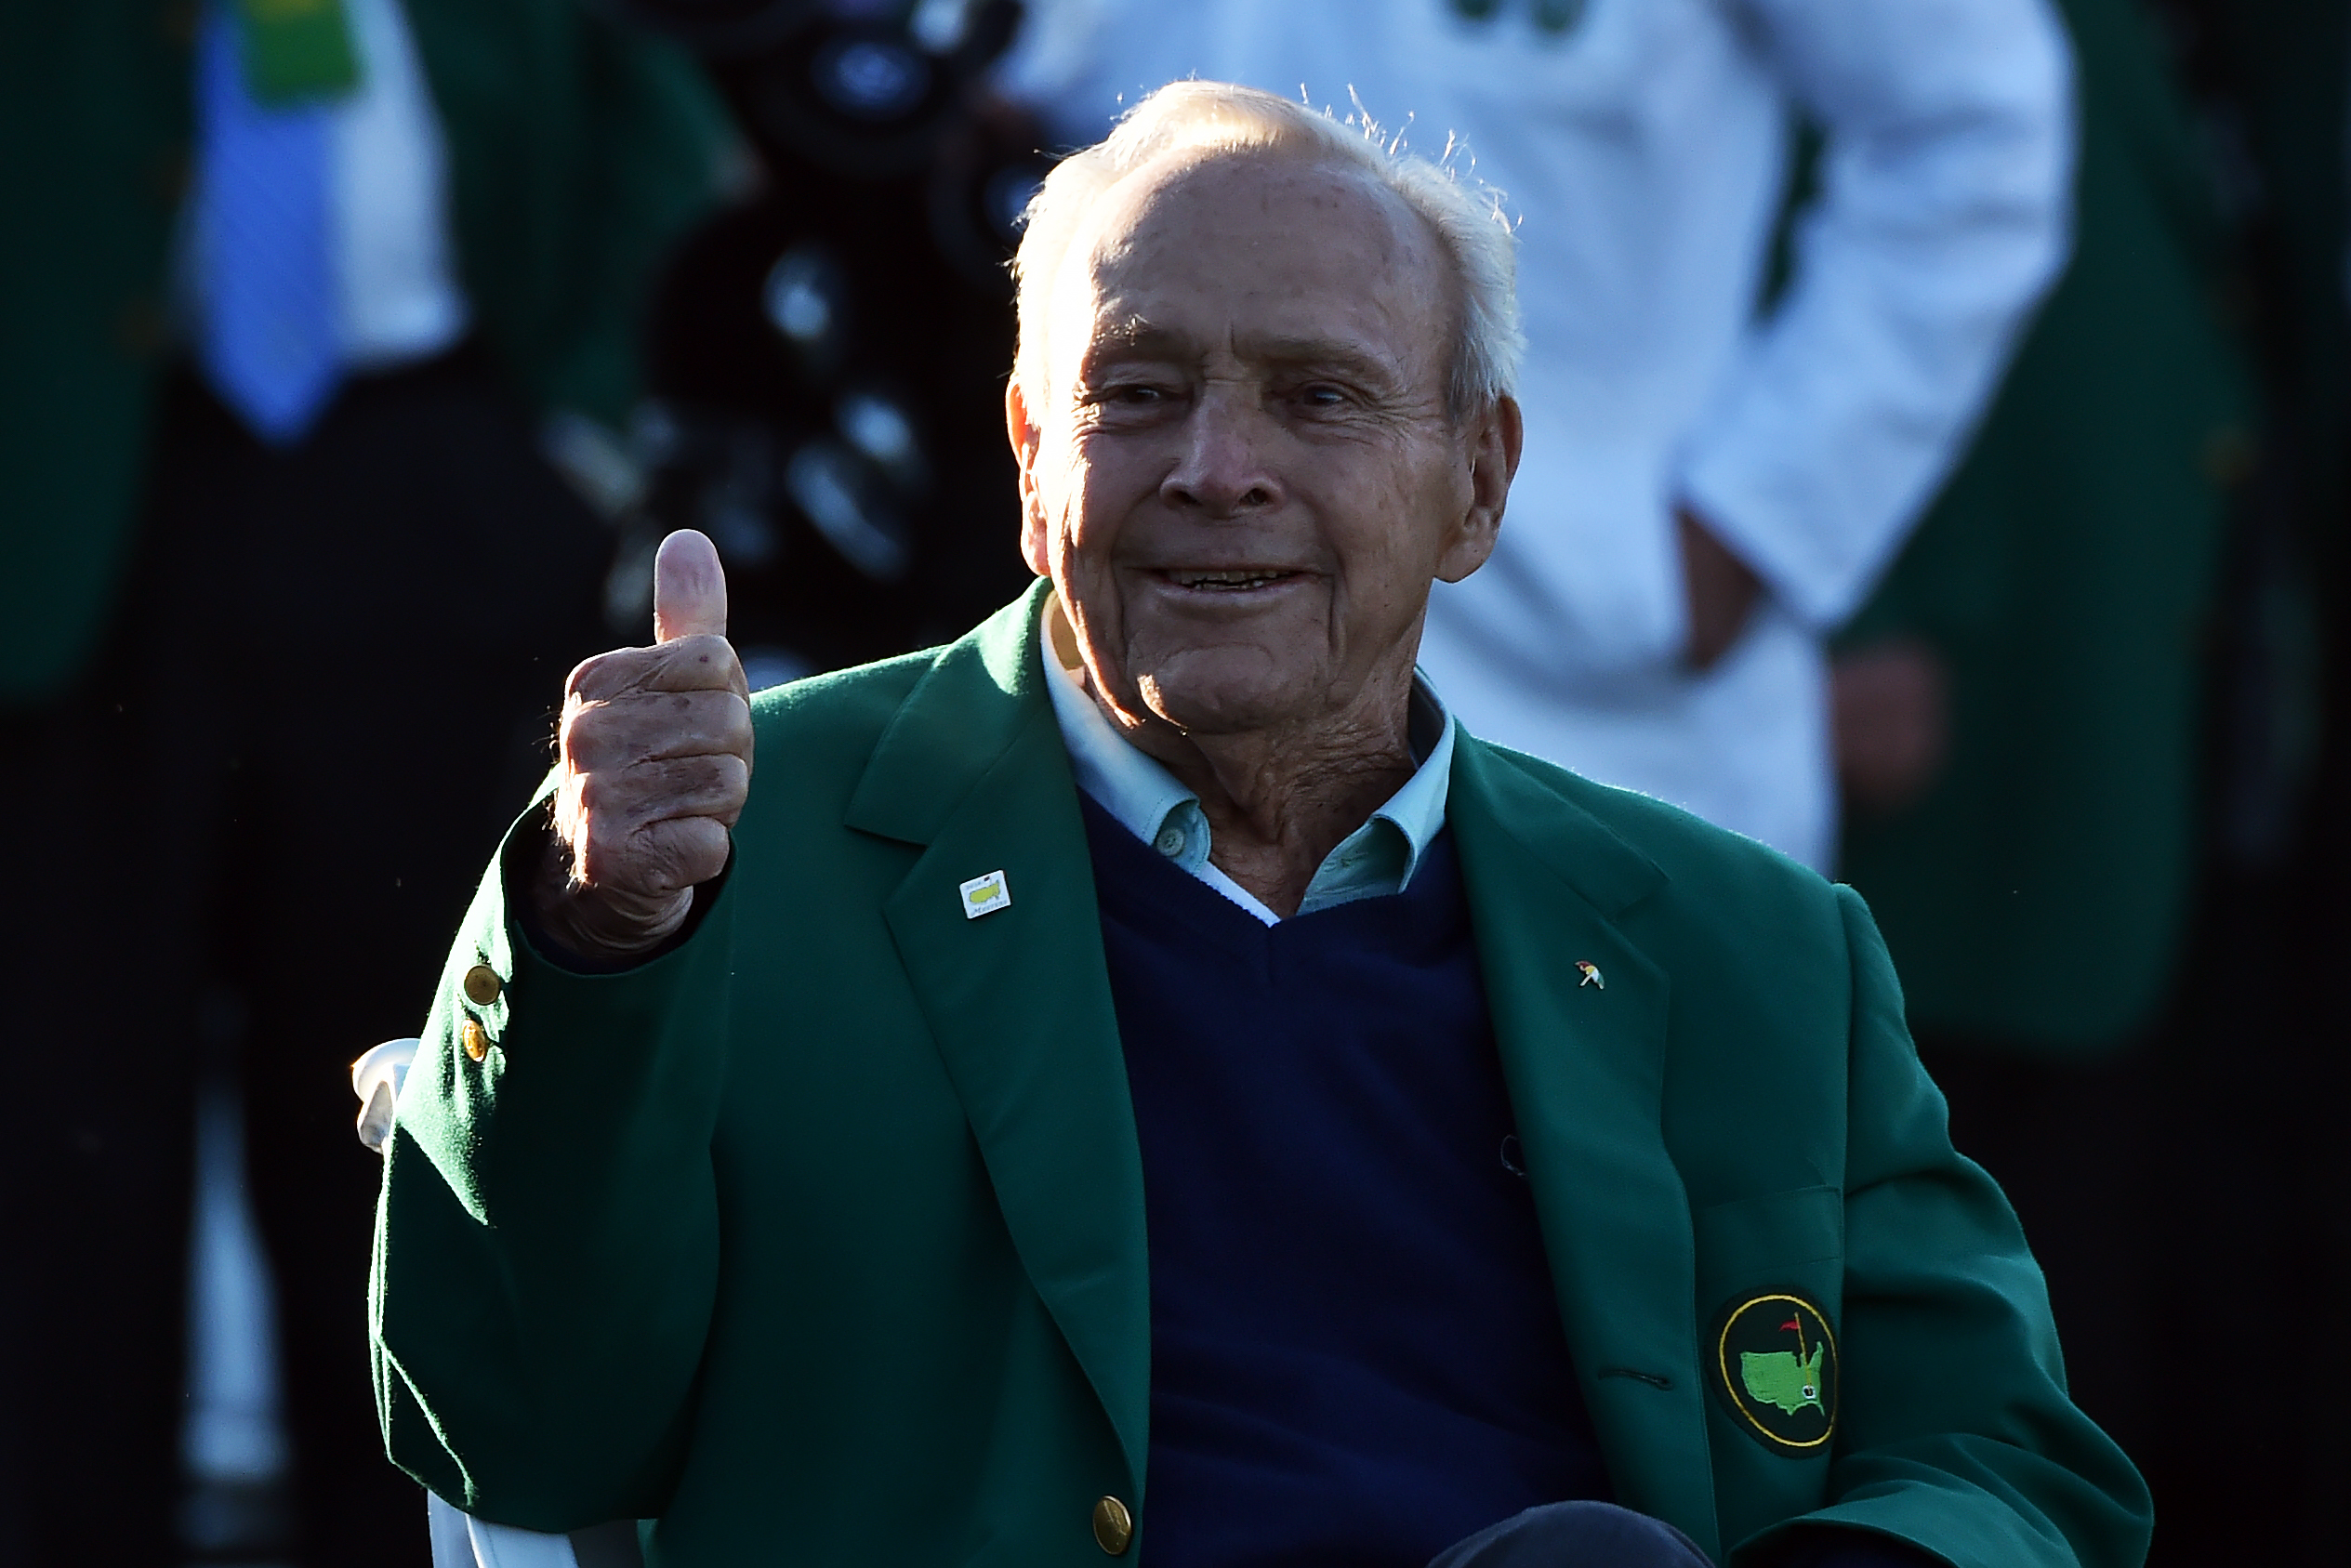 (FILES) This file photo taken on April 7, 2016 shows honorary starter US golfer Arnold Palmer after he arrived to begin Round 1 of the 80th Masters Golf Tournament at the Augusta National Golf Club on April 7, 2016, in Augusta, Georgia. Beloved golf great Arnold Palmer died at 87 on September 25, 2016. / AFP PHOTO / Nicholas Kamm